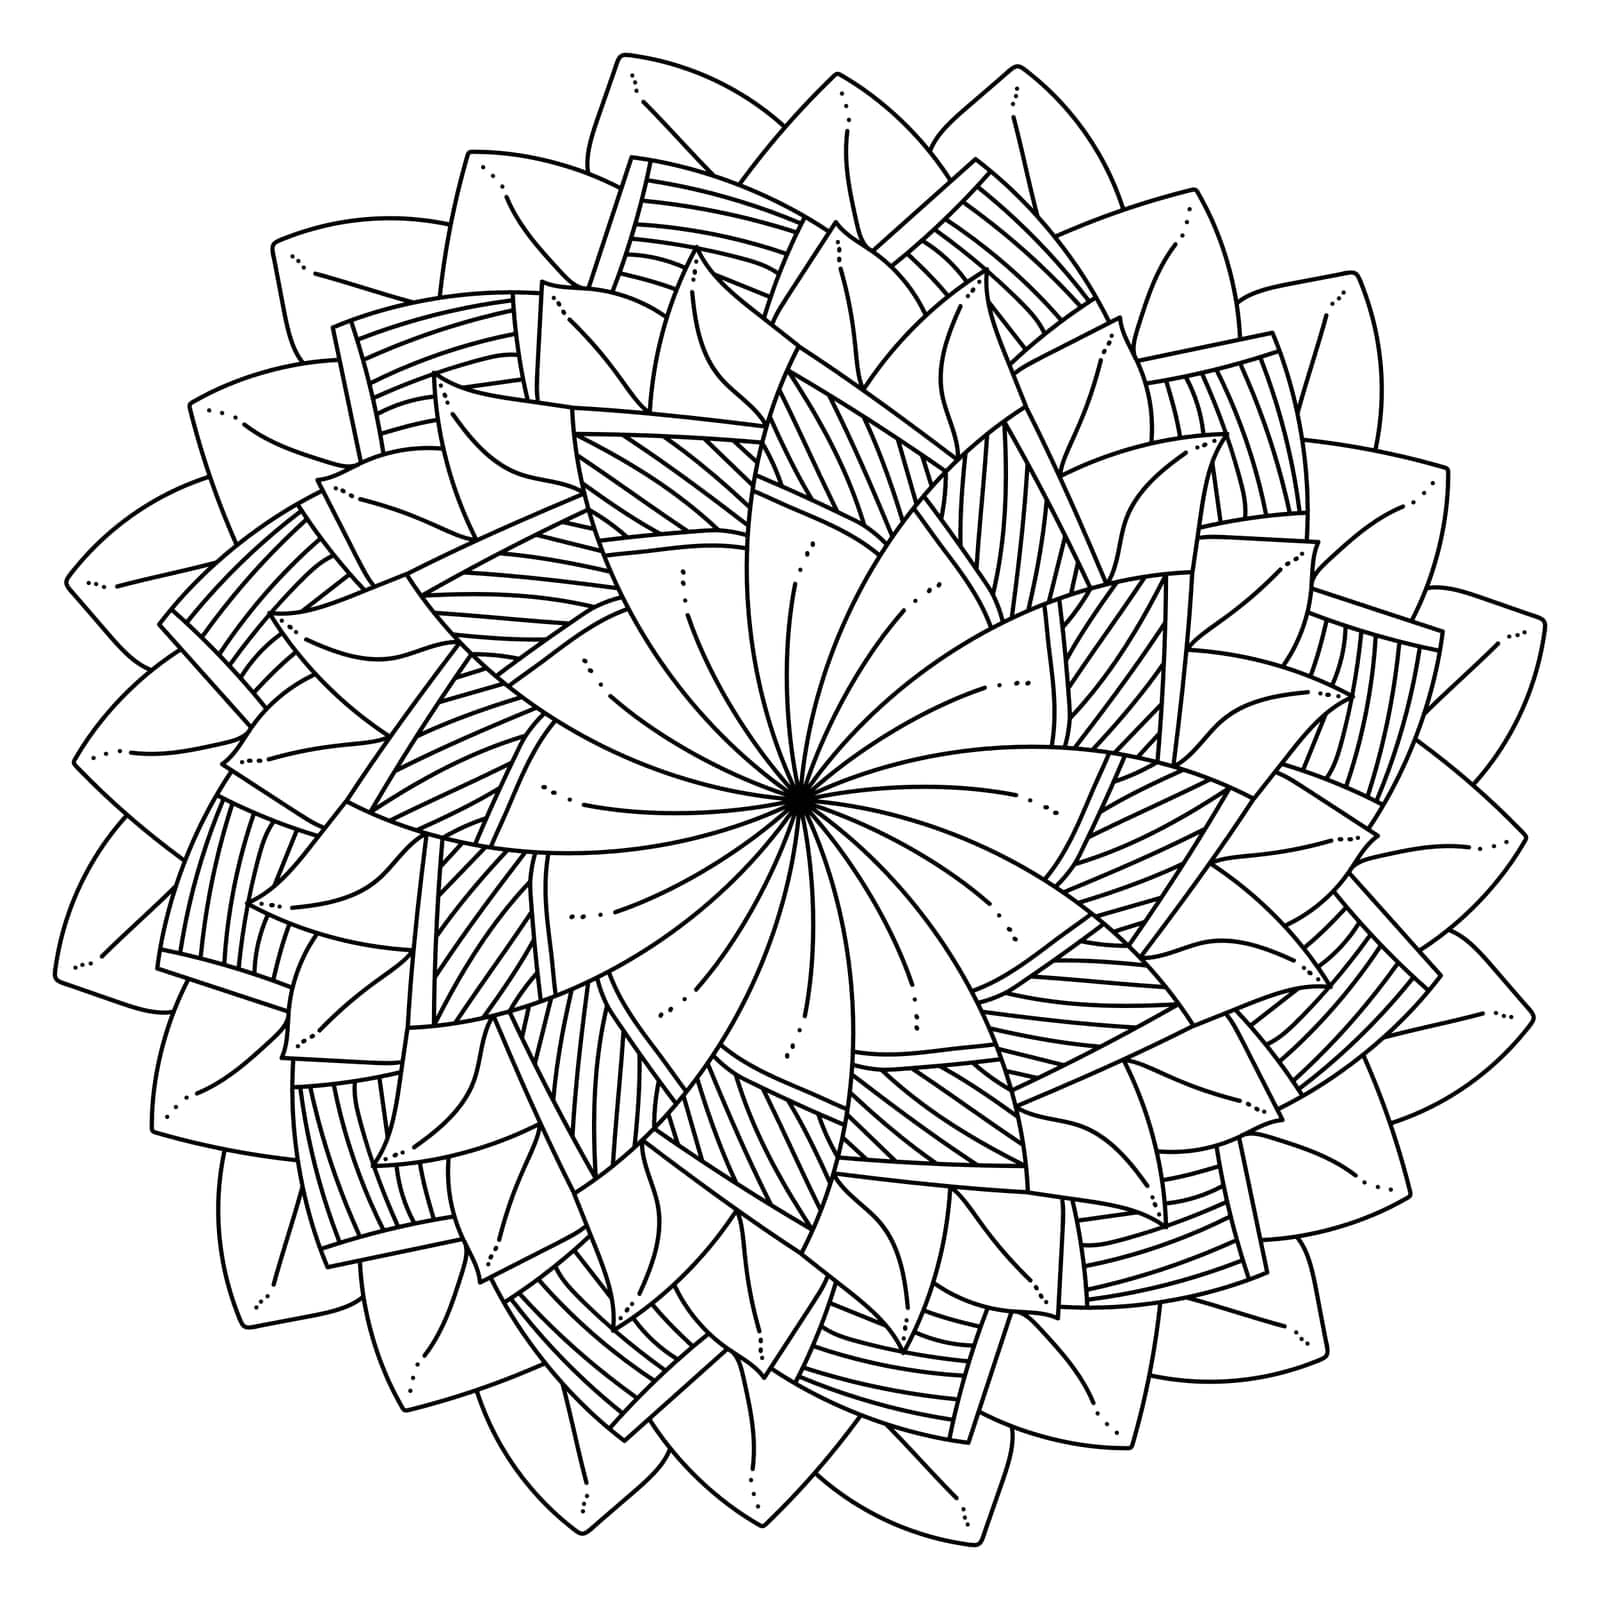 Abstract mandala contour with striped petals, meditative coloring page for creativity by Sunny_Coloring